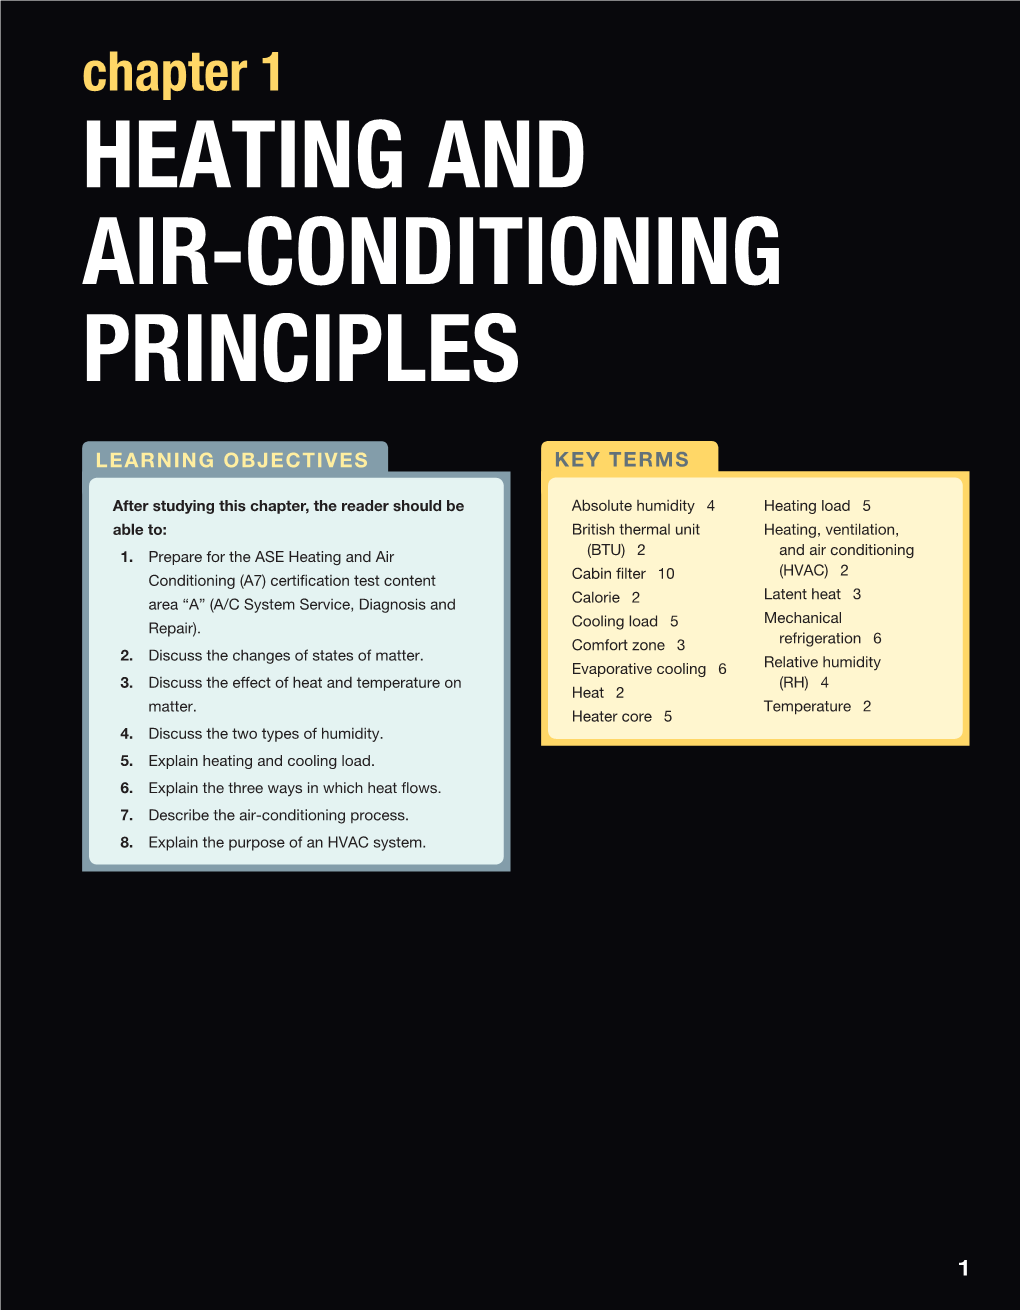 Heating and Air-Conditioning Principles